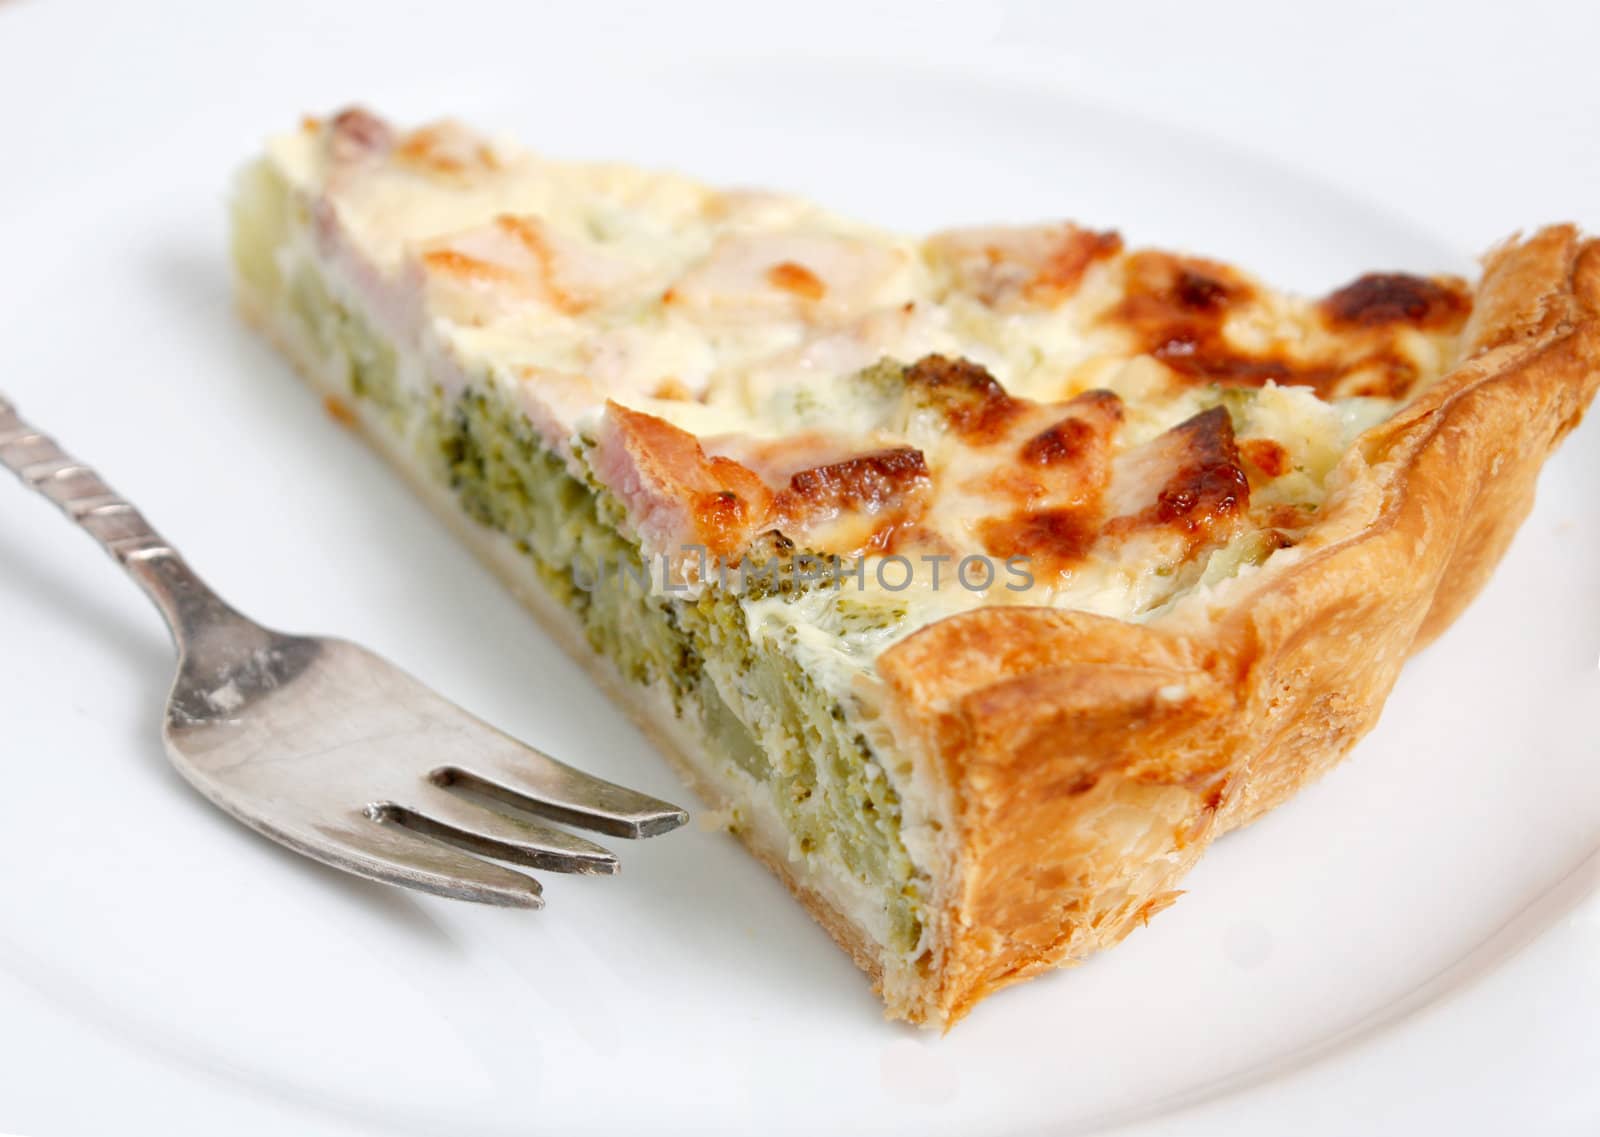 Vegetable quiche by leeser